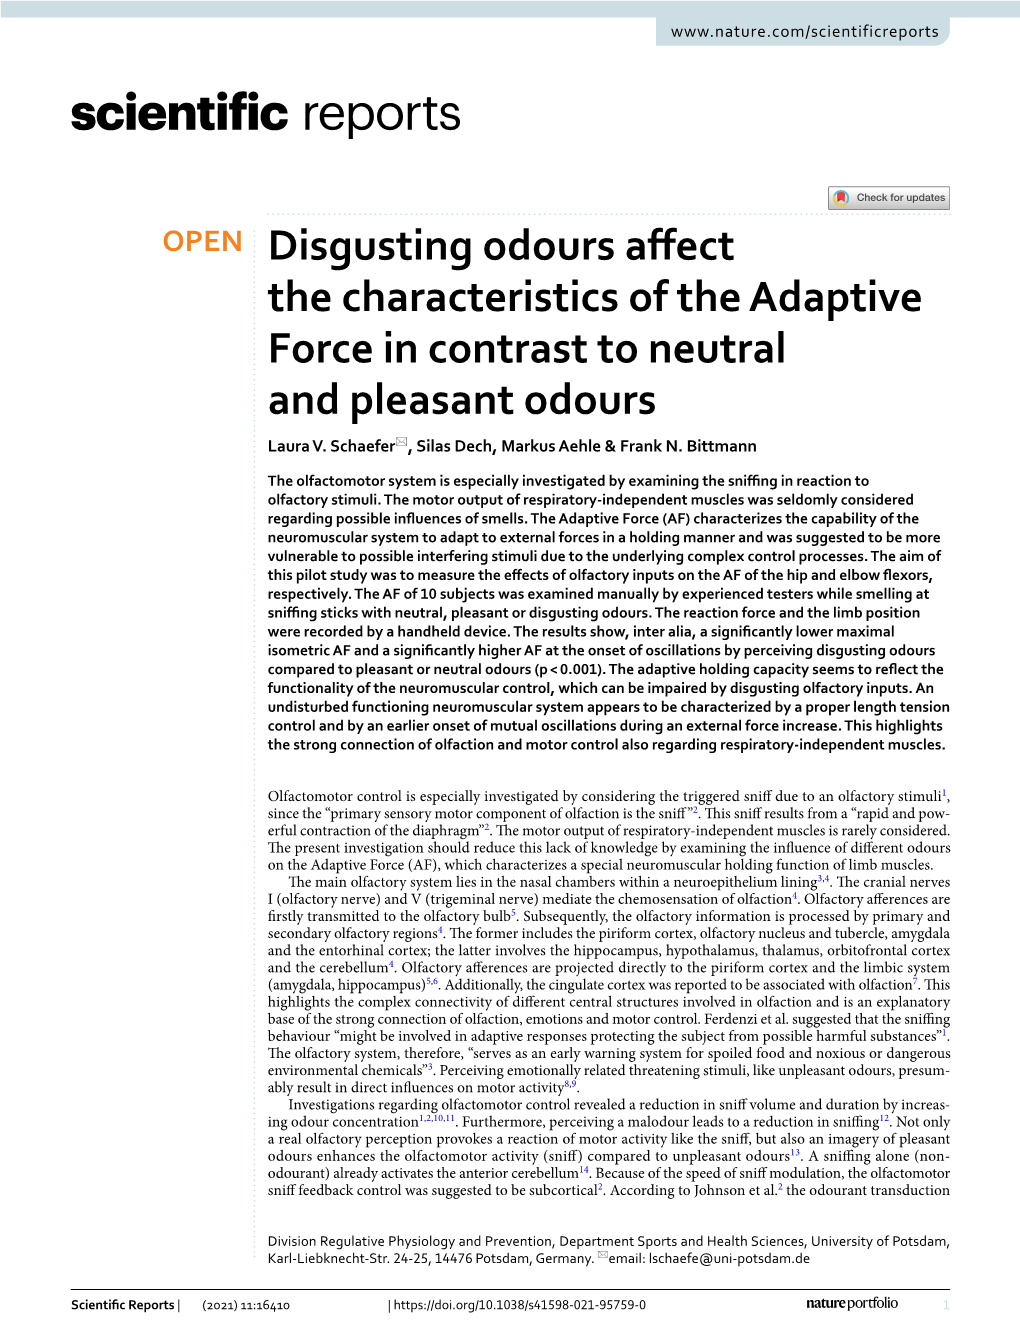 Disgusting Odours Affect the Characteristics of the Adaptive